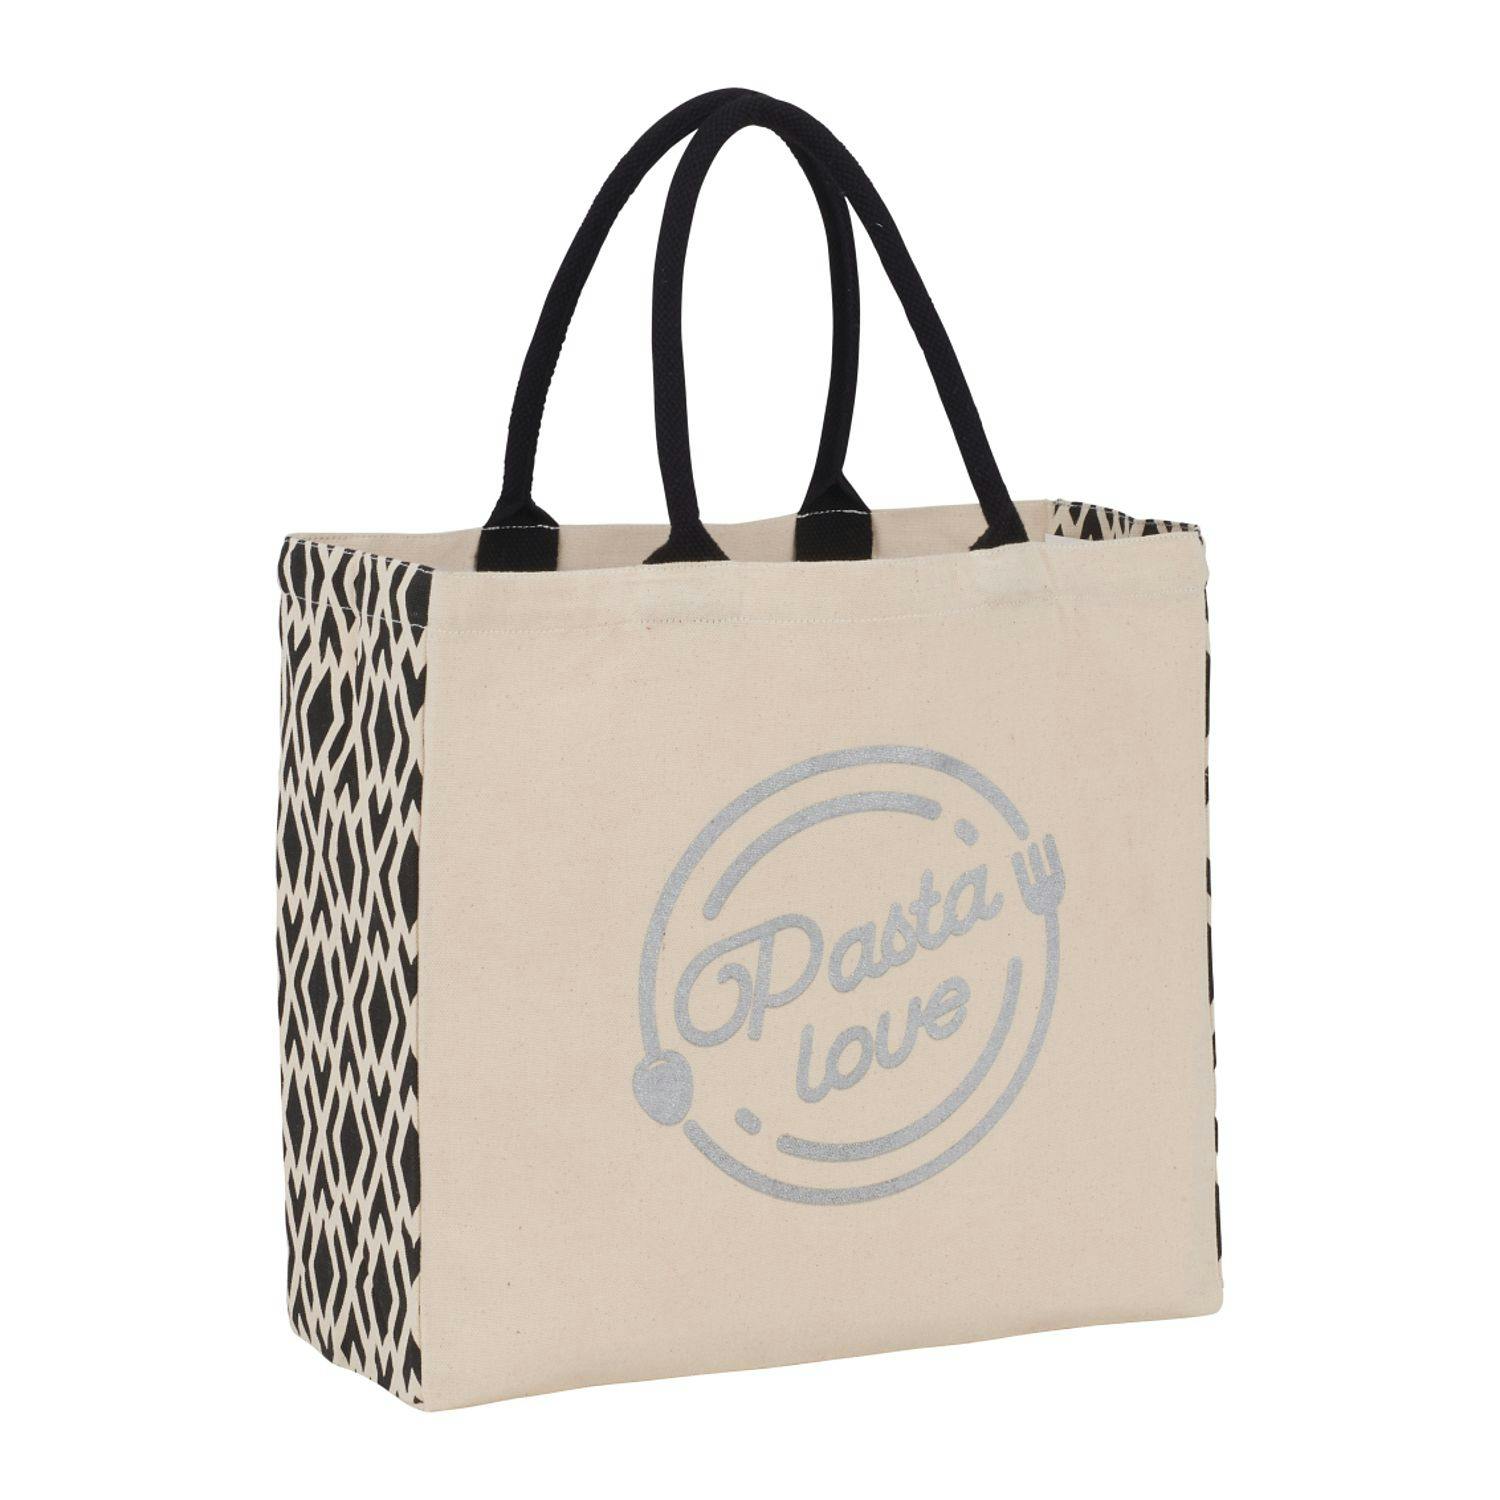 Diamond Gusset Cotton Tote - additional Image 1